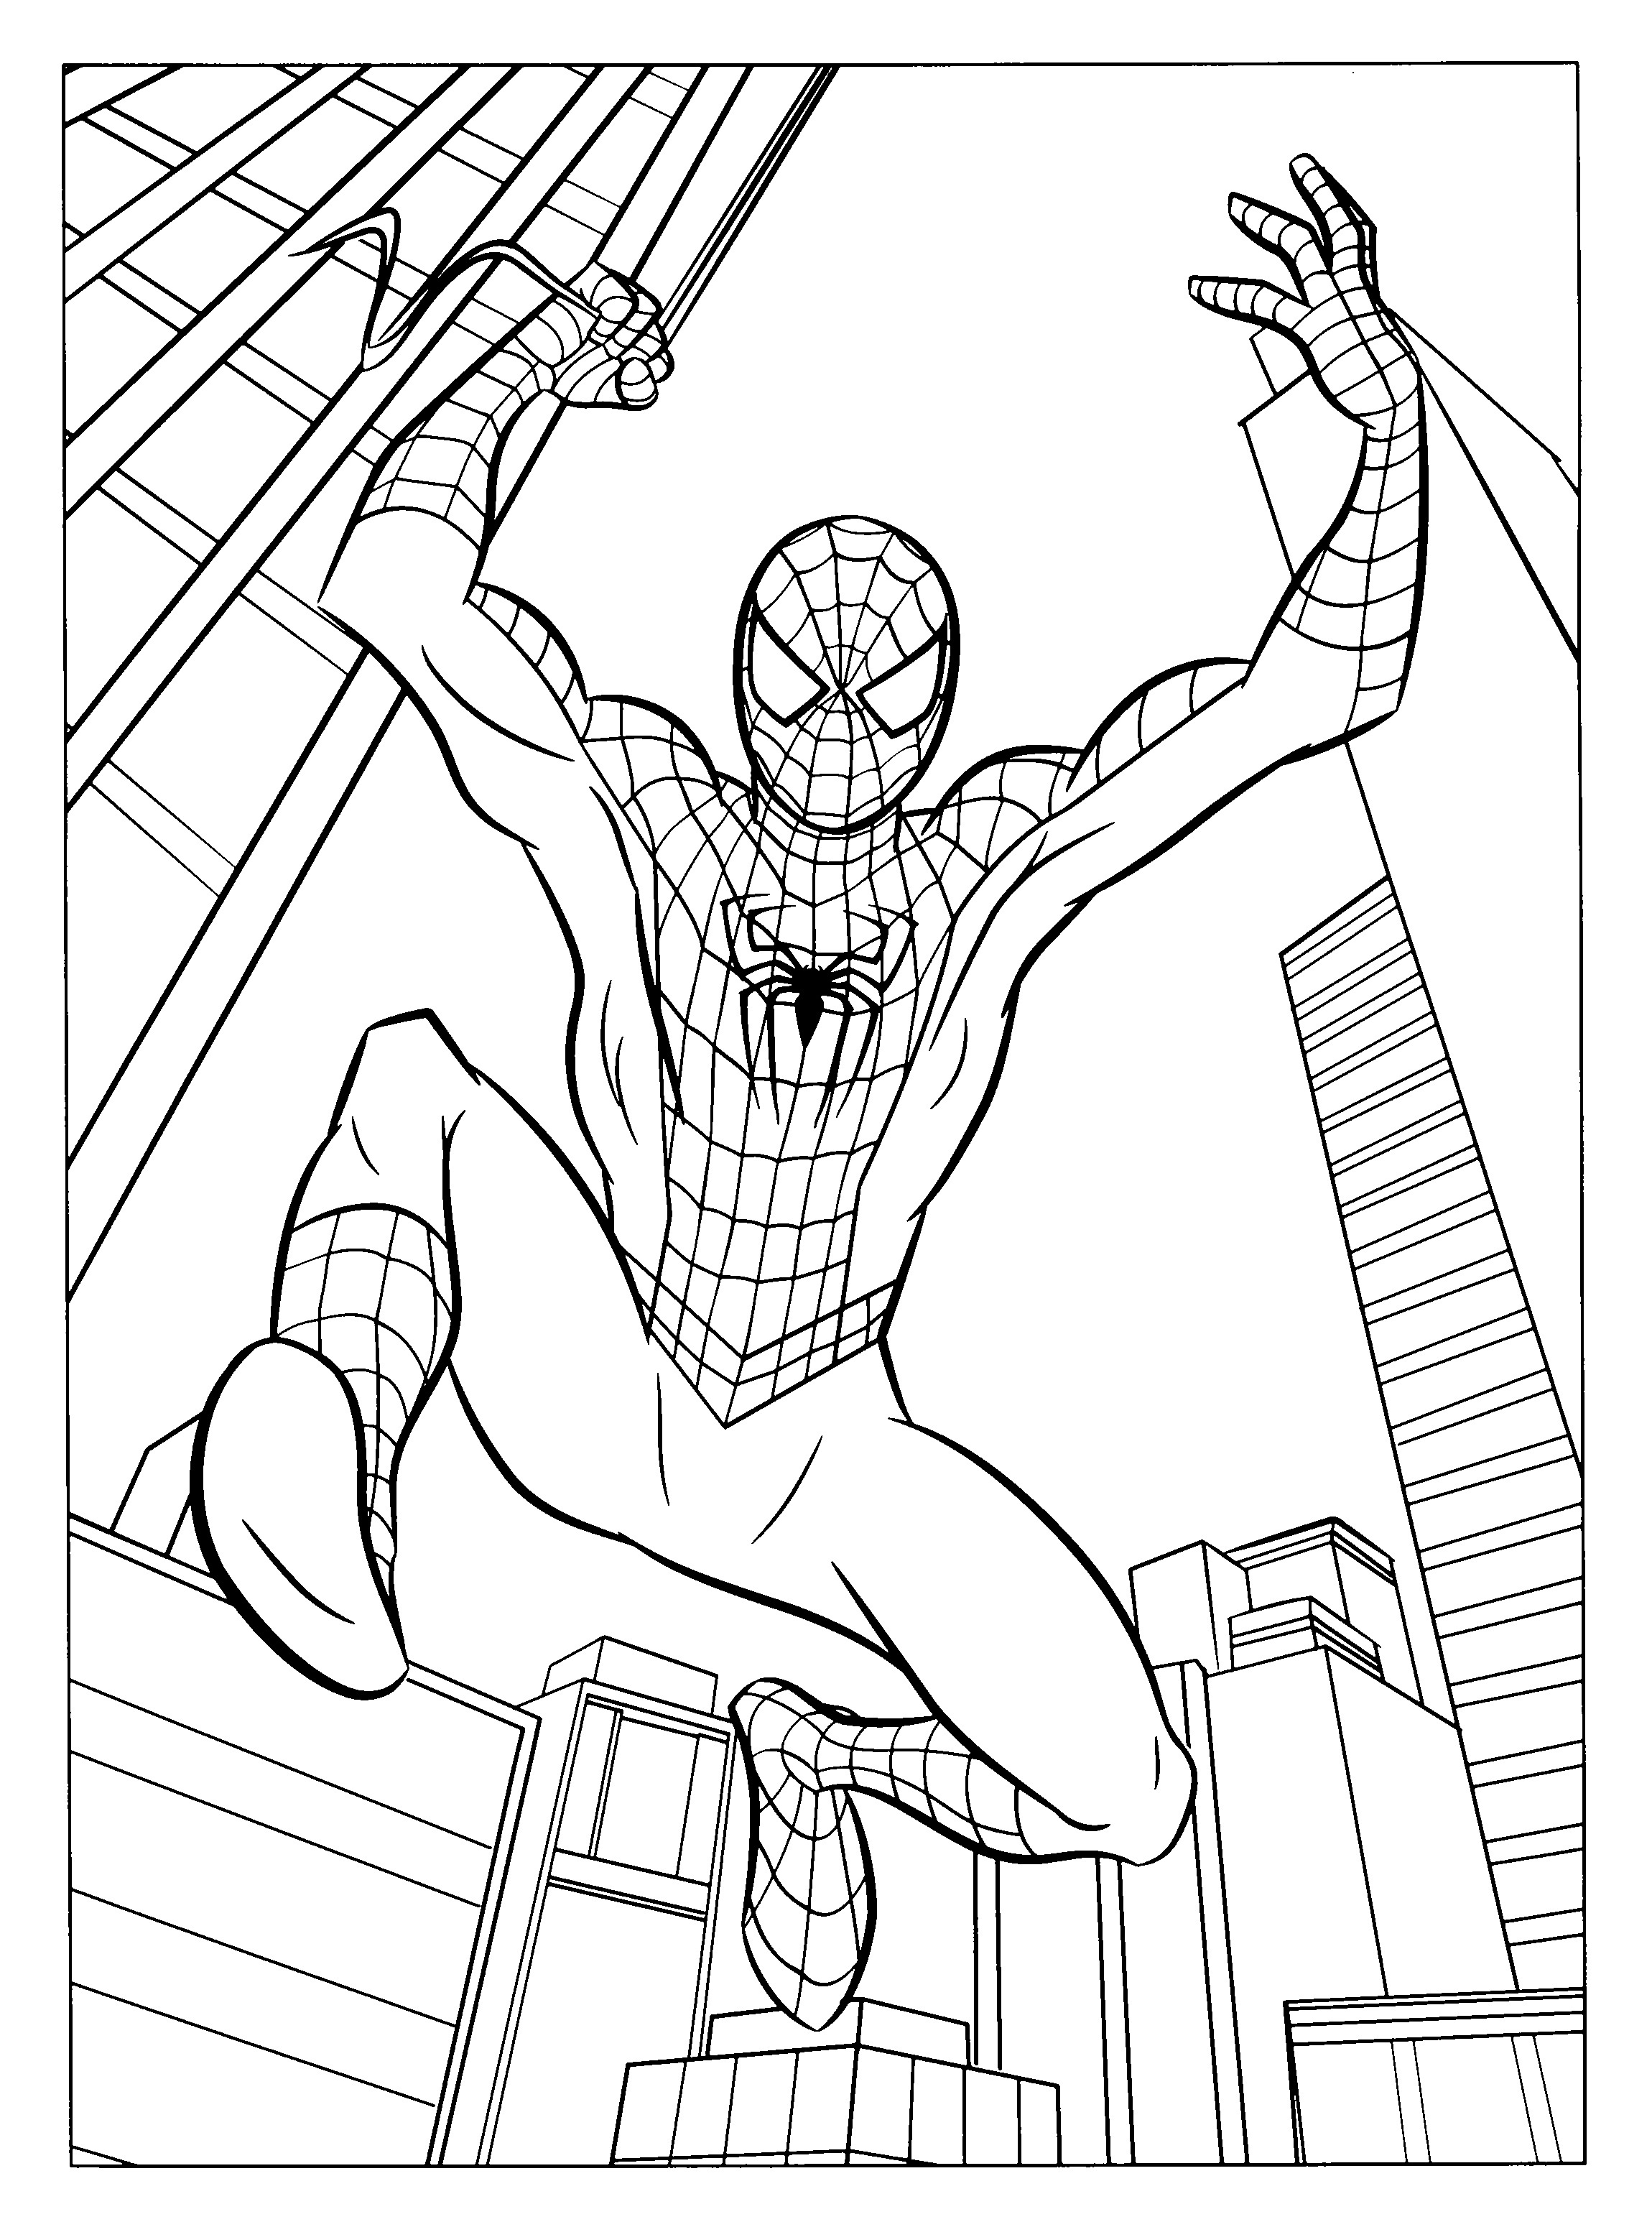 spiderman-coloring-pages-coloring-pages-to-print